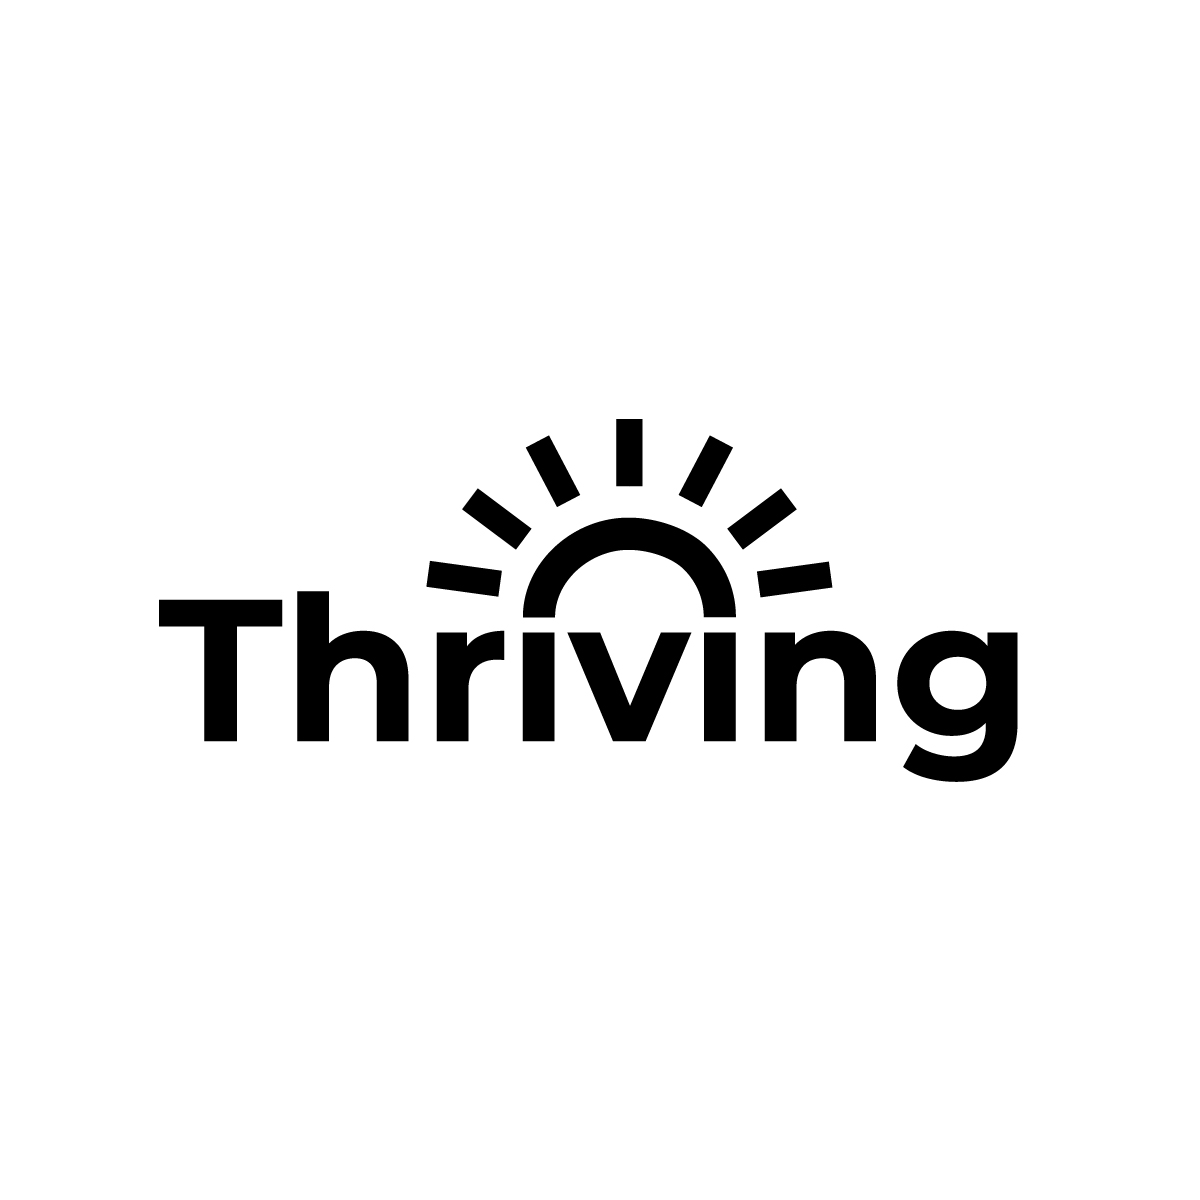 Technical.ly’s Thriving project launches summer 2022.